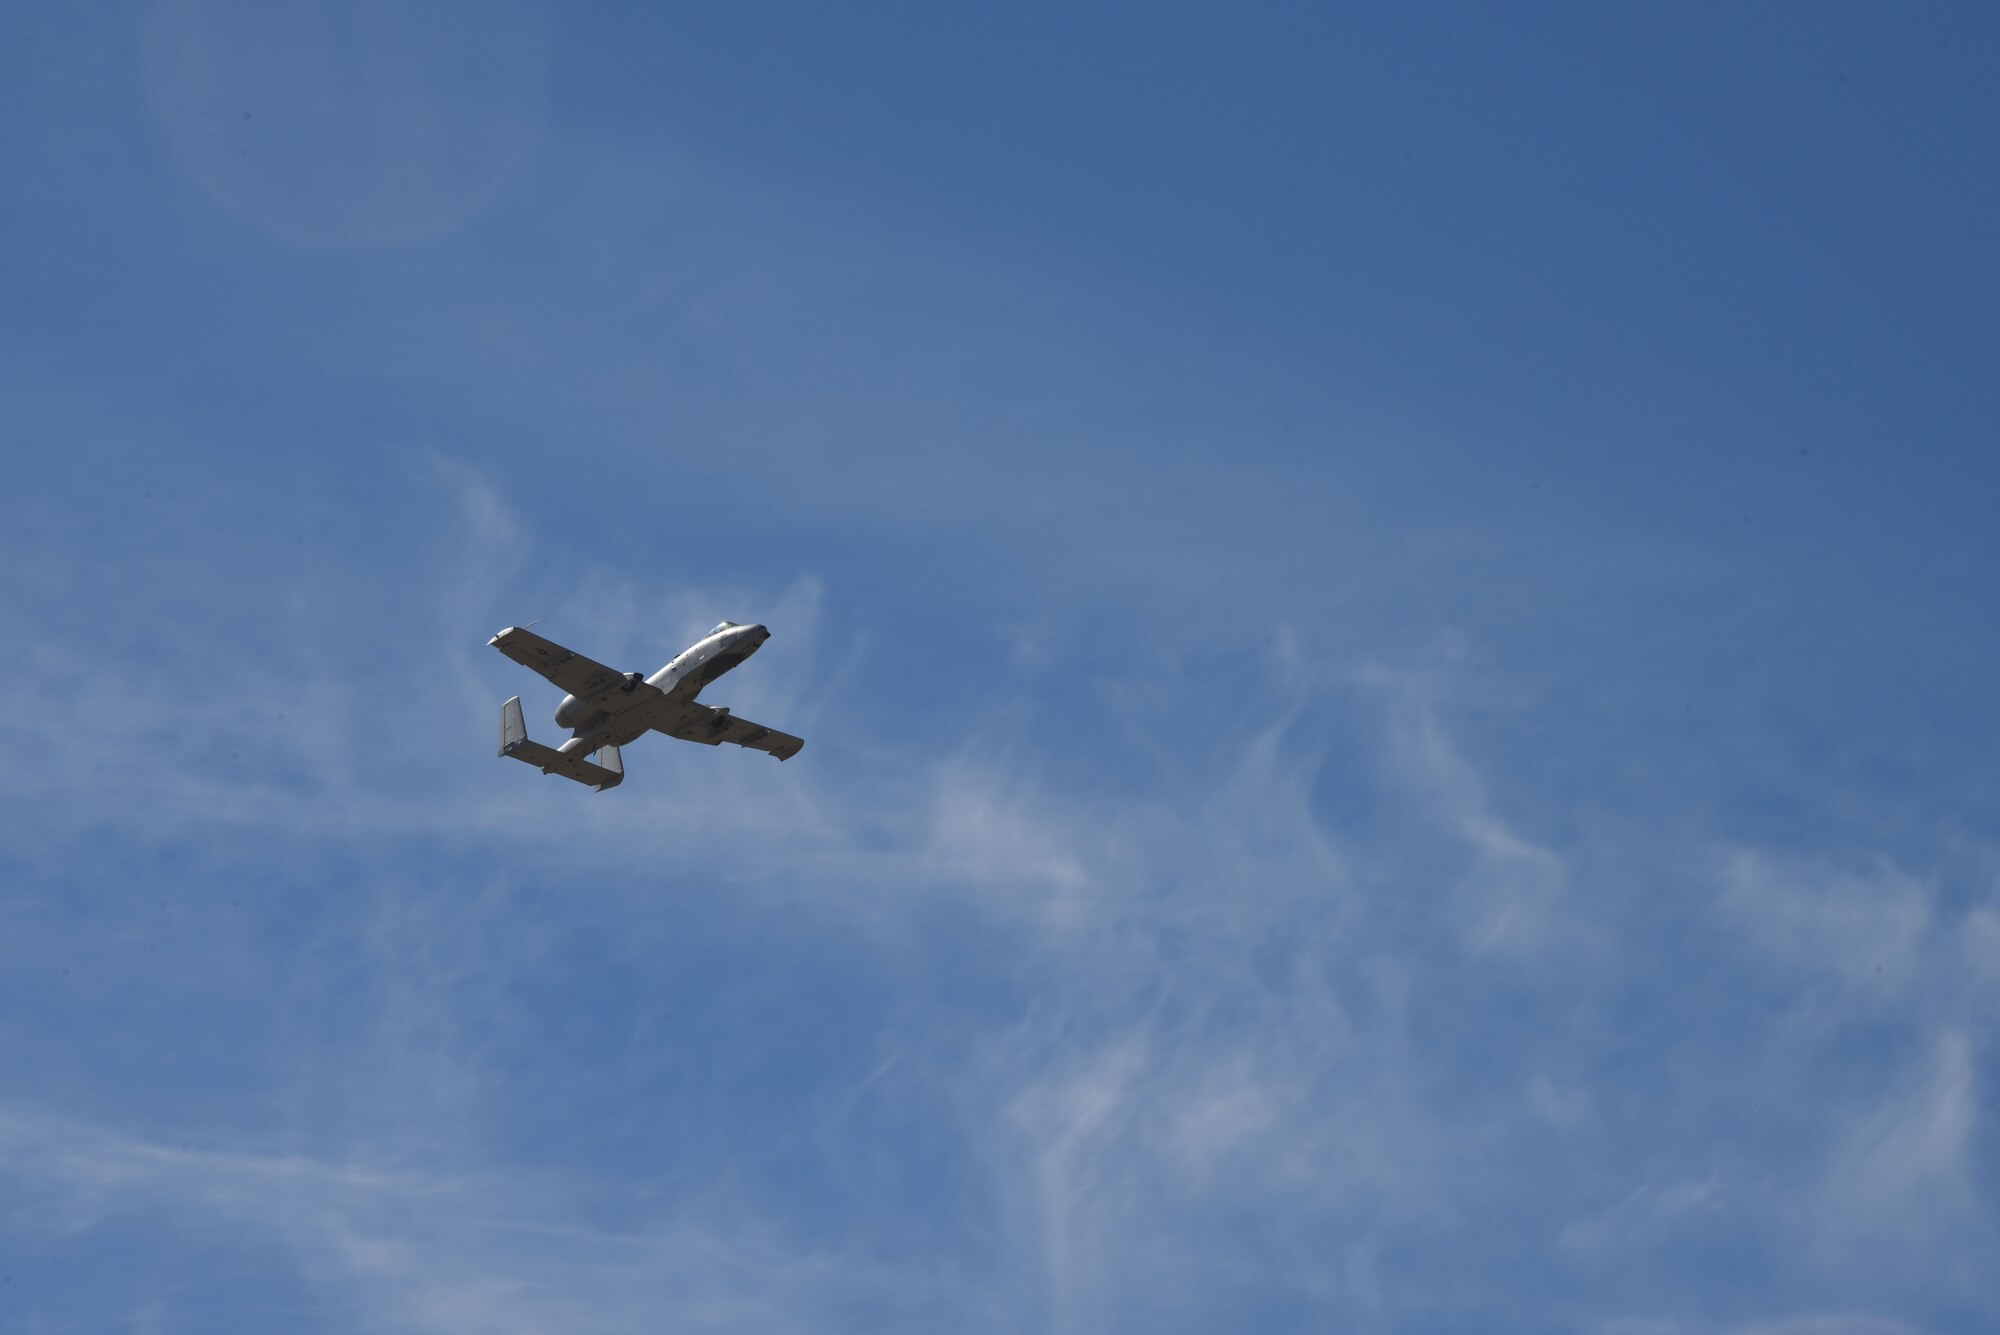 A photo of an A-10 flying over DM